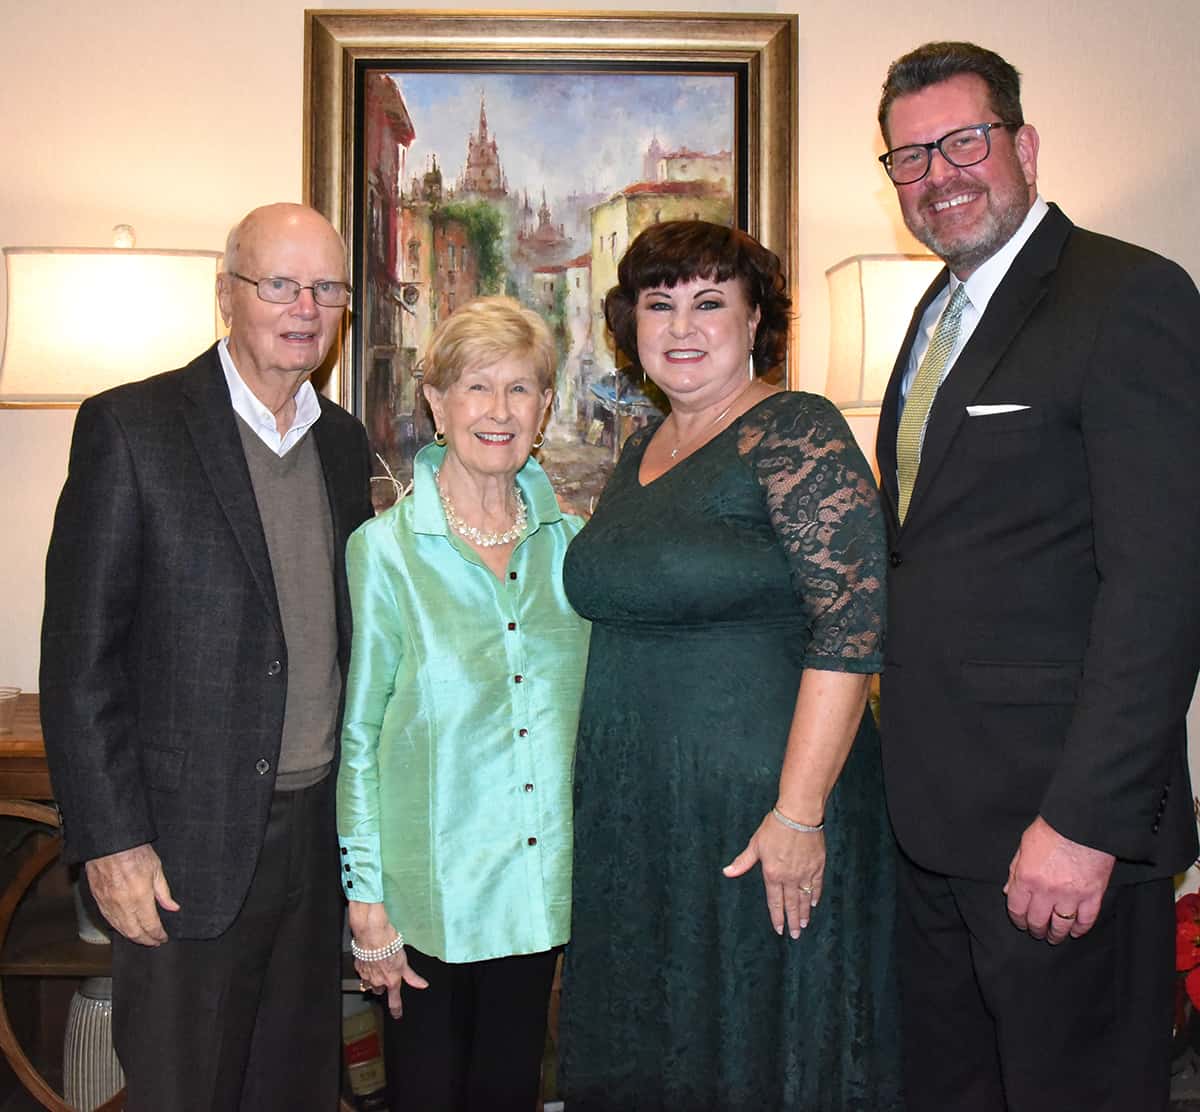 SGTC Foundation Chair Bill Harris and his wife, Ann, are shown above with SGTC President Dr. John and Barbara Watford.